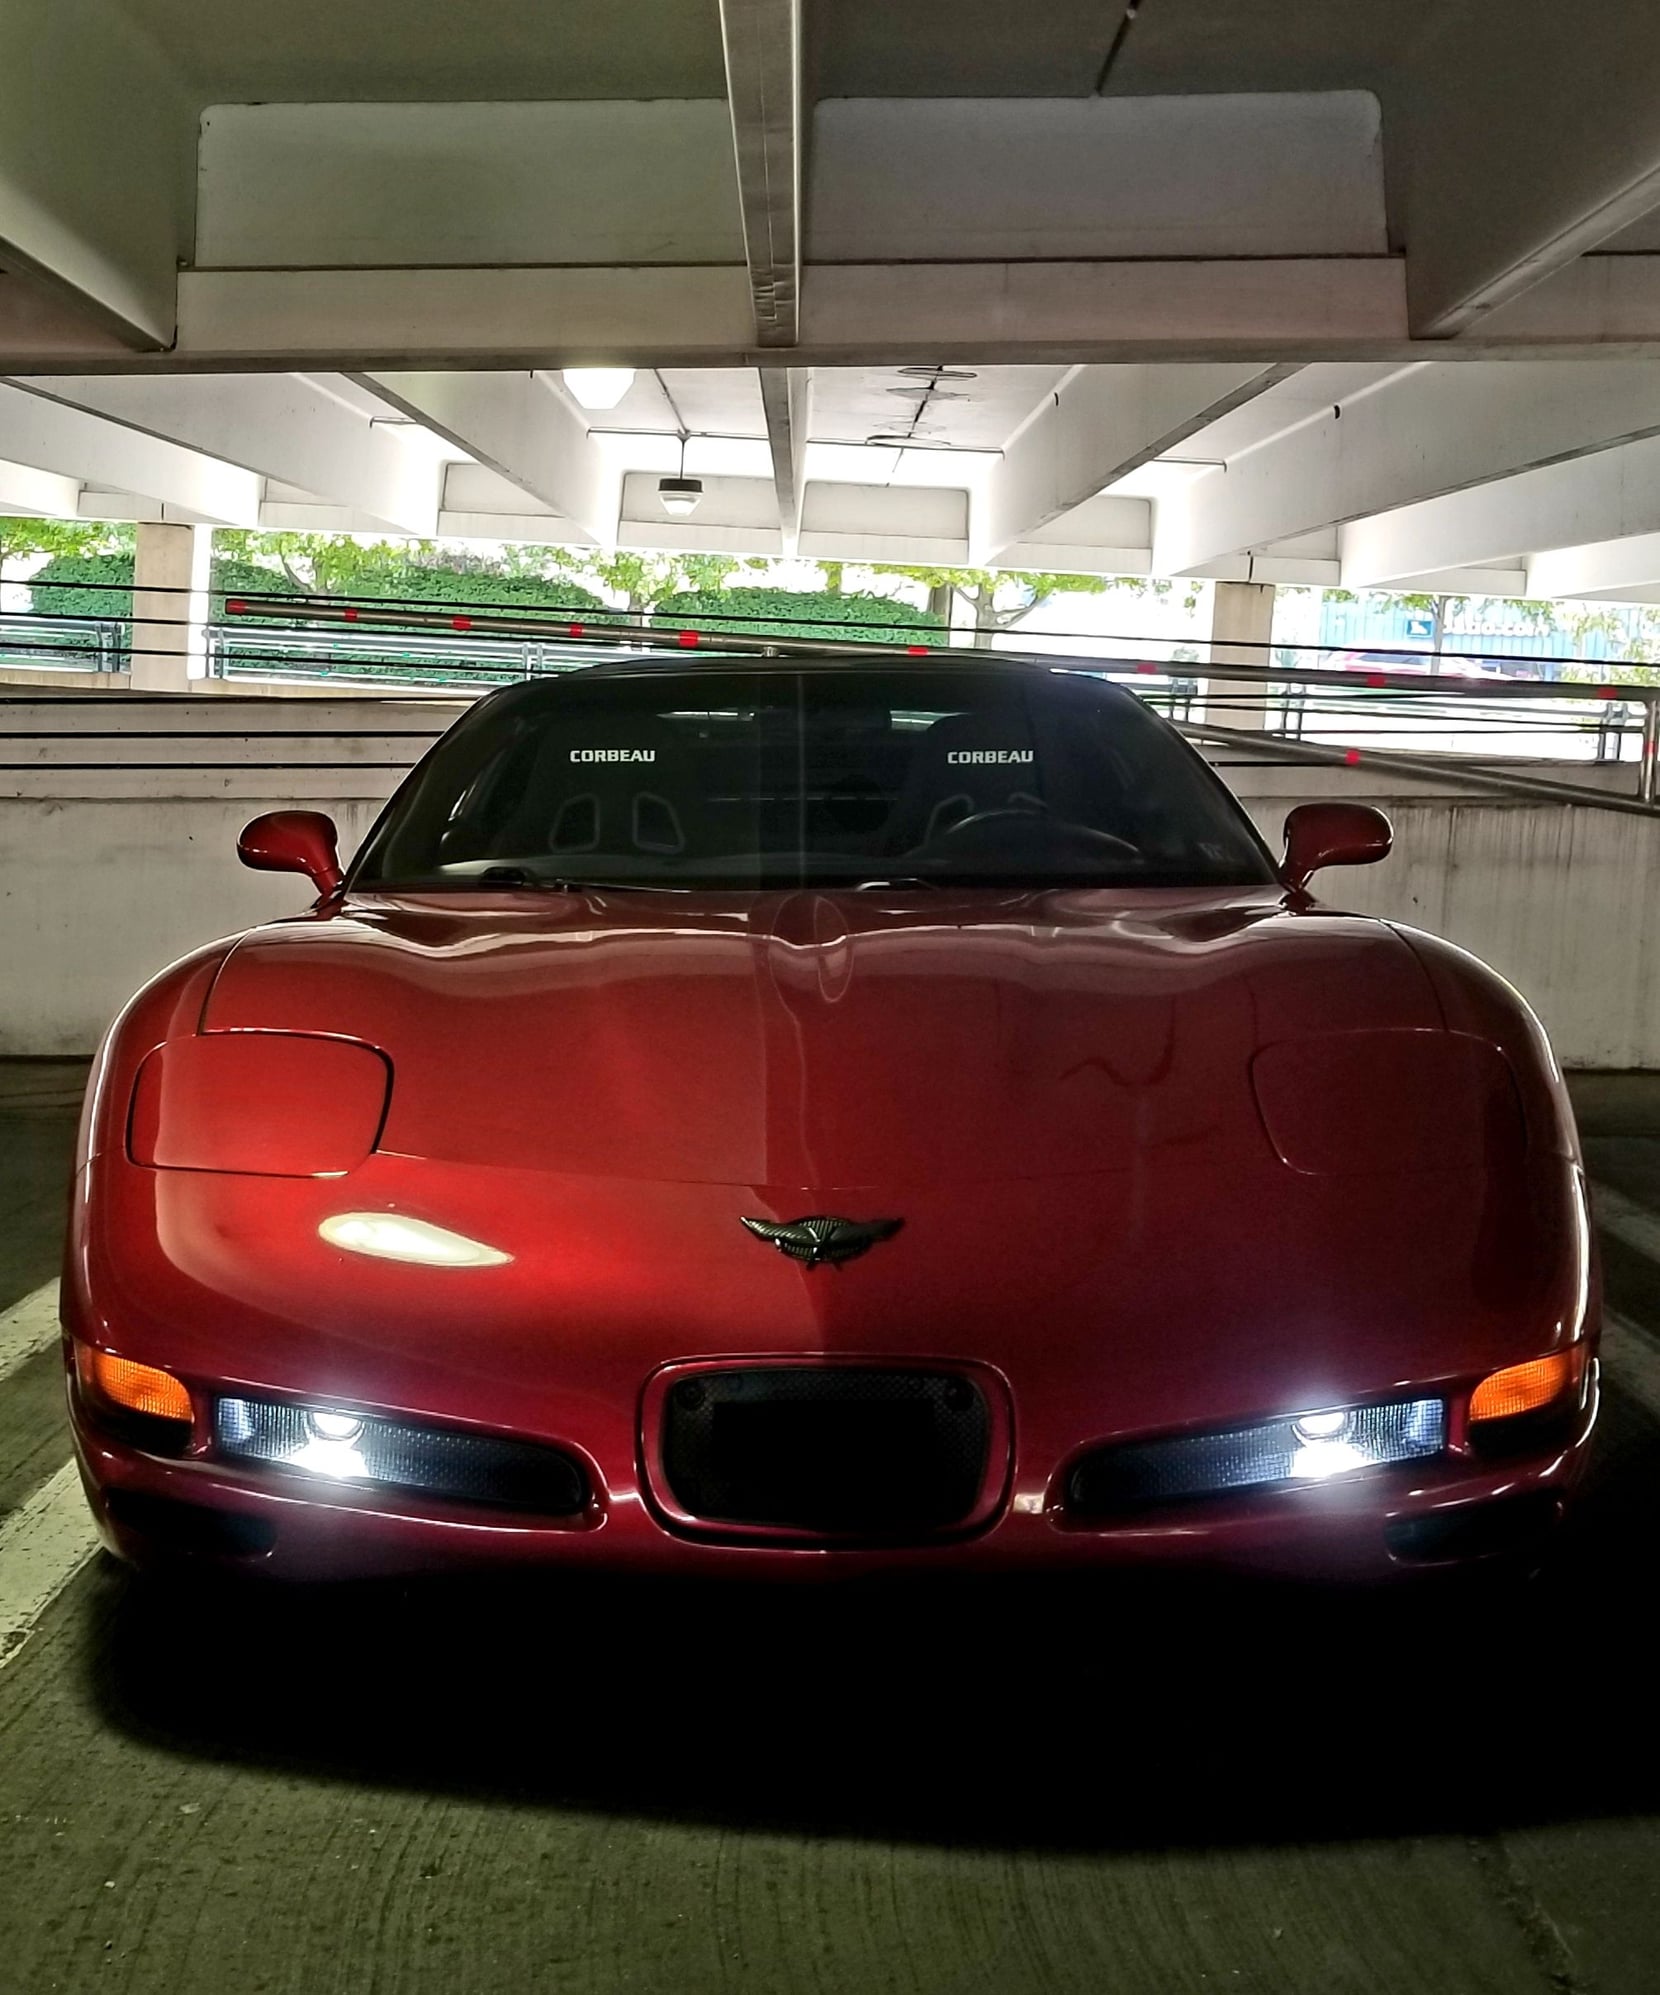 1999 Chevrolet Corvette - Supercharged '99 Corvette - 25k orig miles - 6 Speed - Used - VIN 11111111111111111 - 25,000 Miles - 8 cyl - Manual - Coupe - Red - King Of Prussia, PA 19406, United States